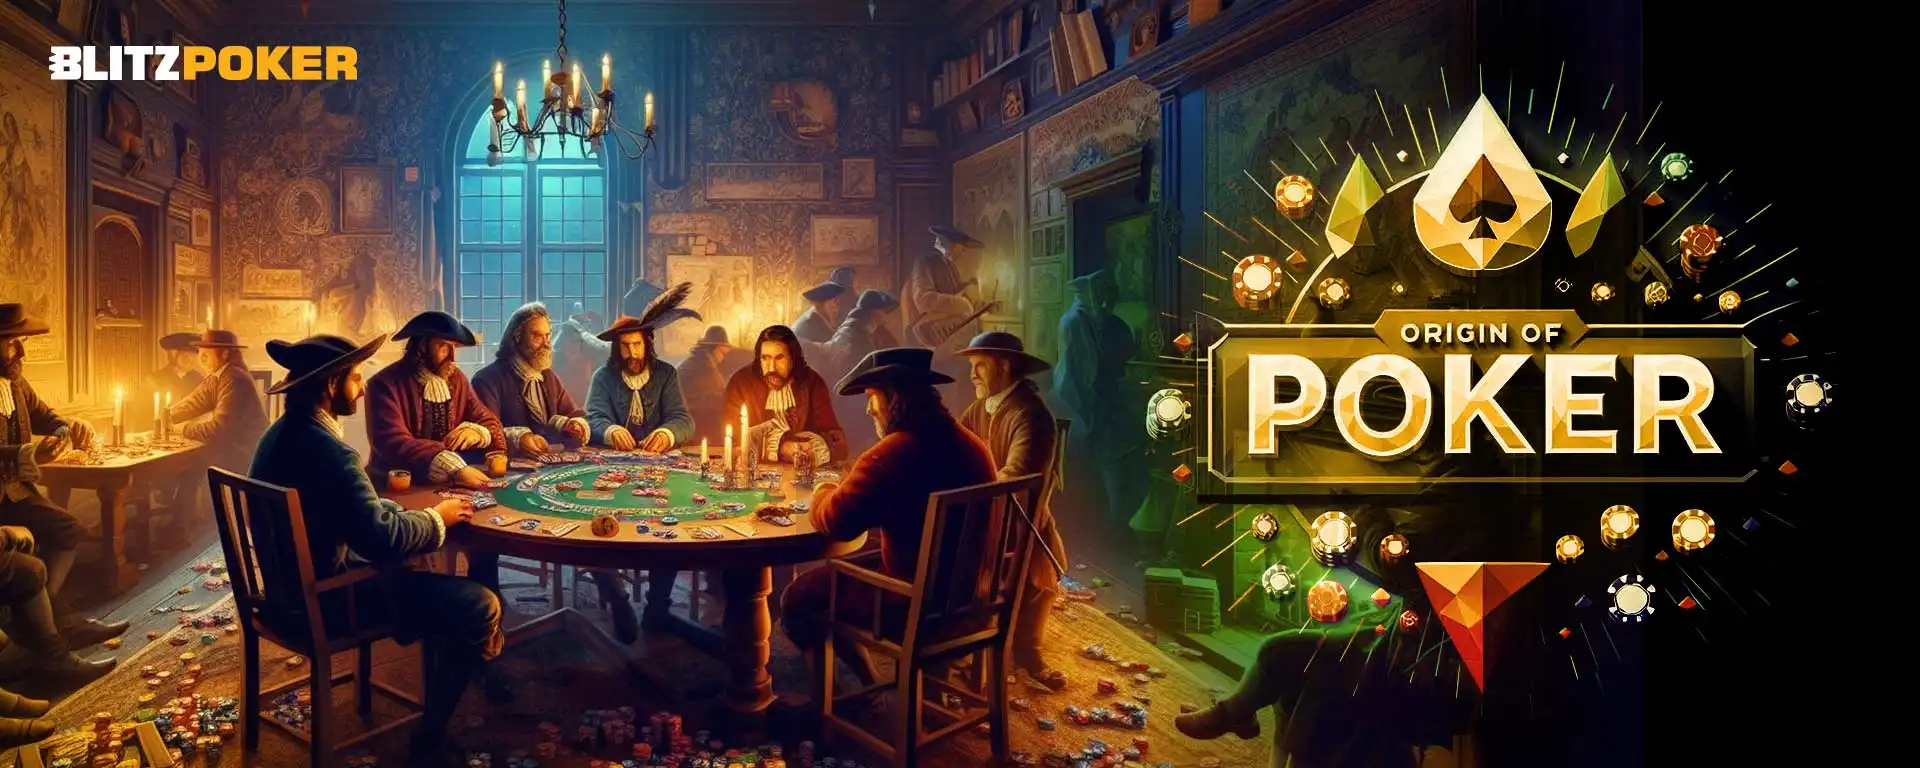 Origin of Poker and How The Game Evolved